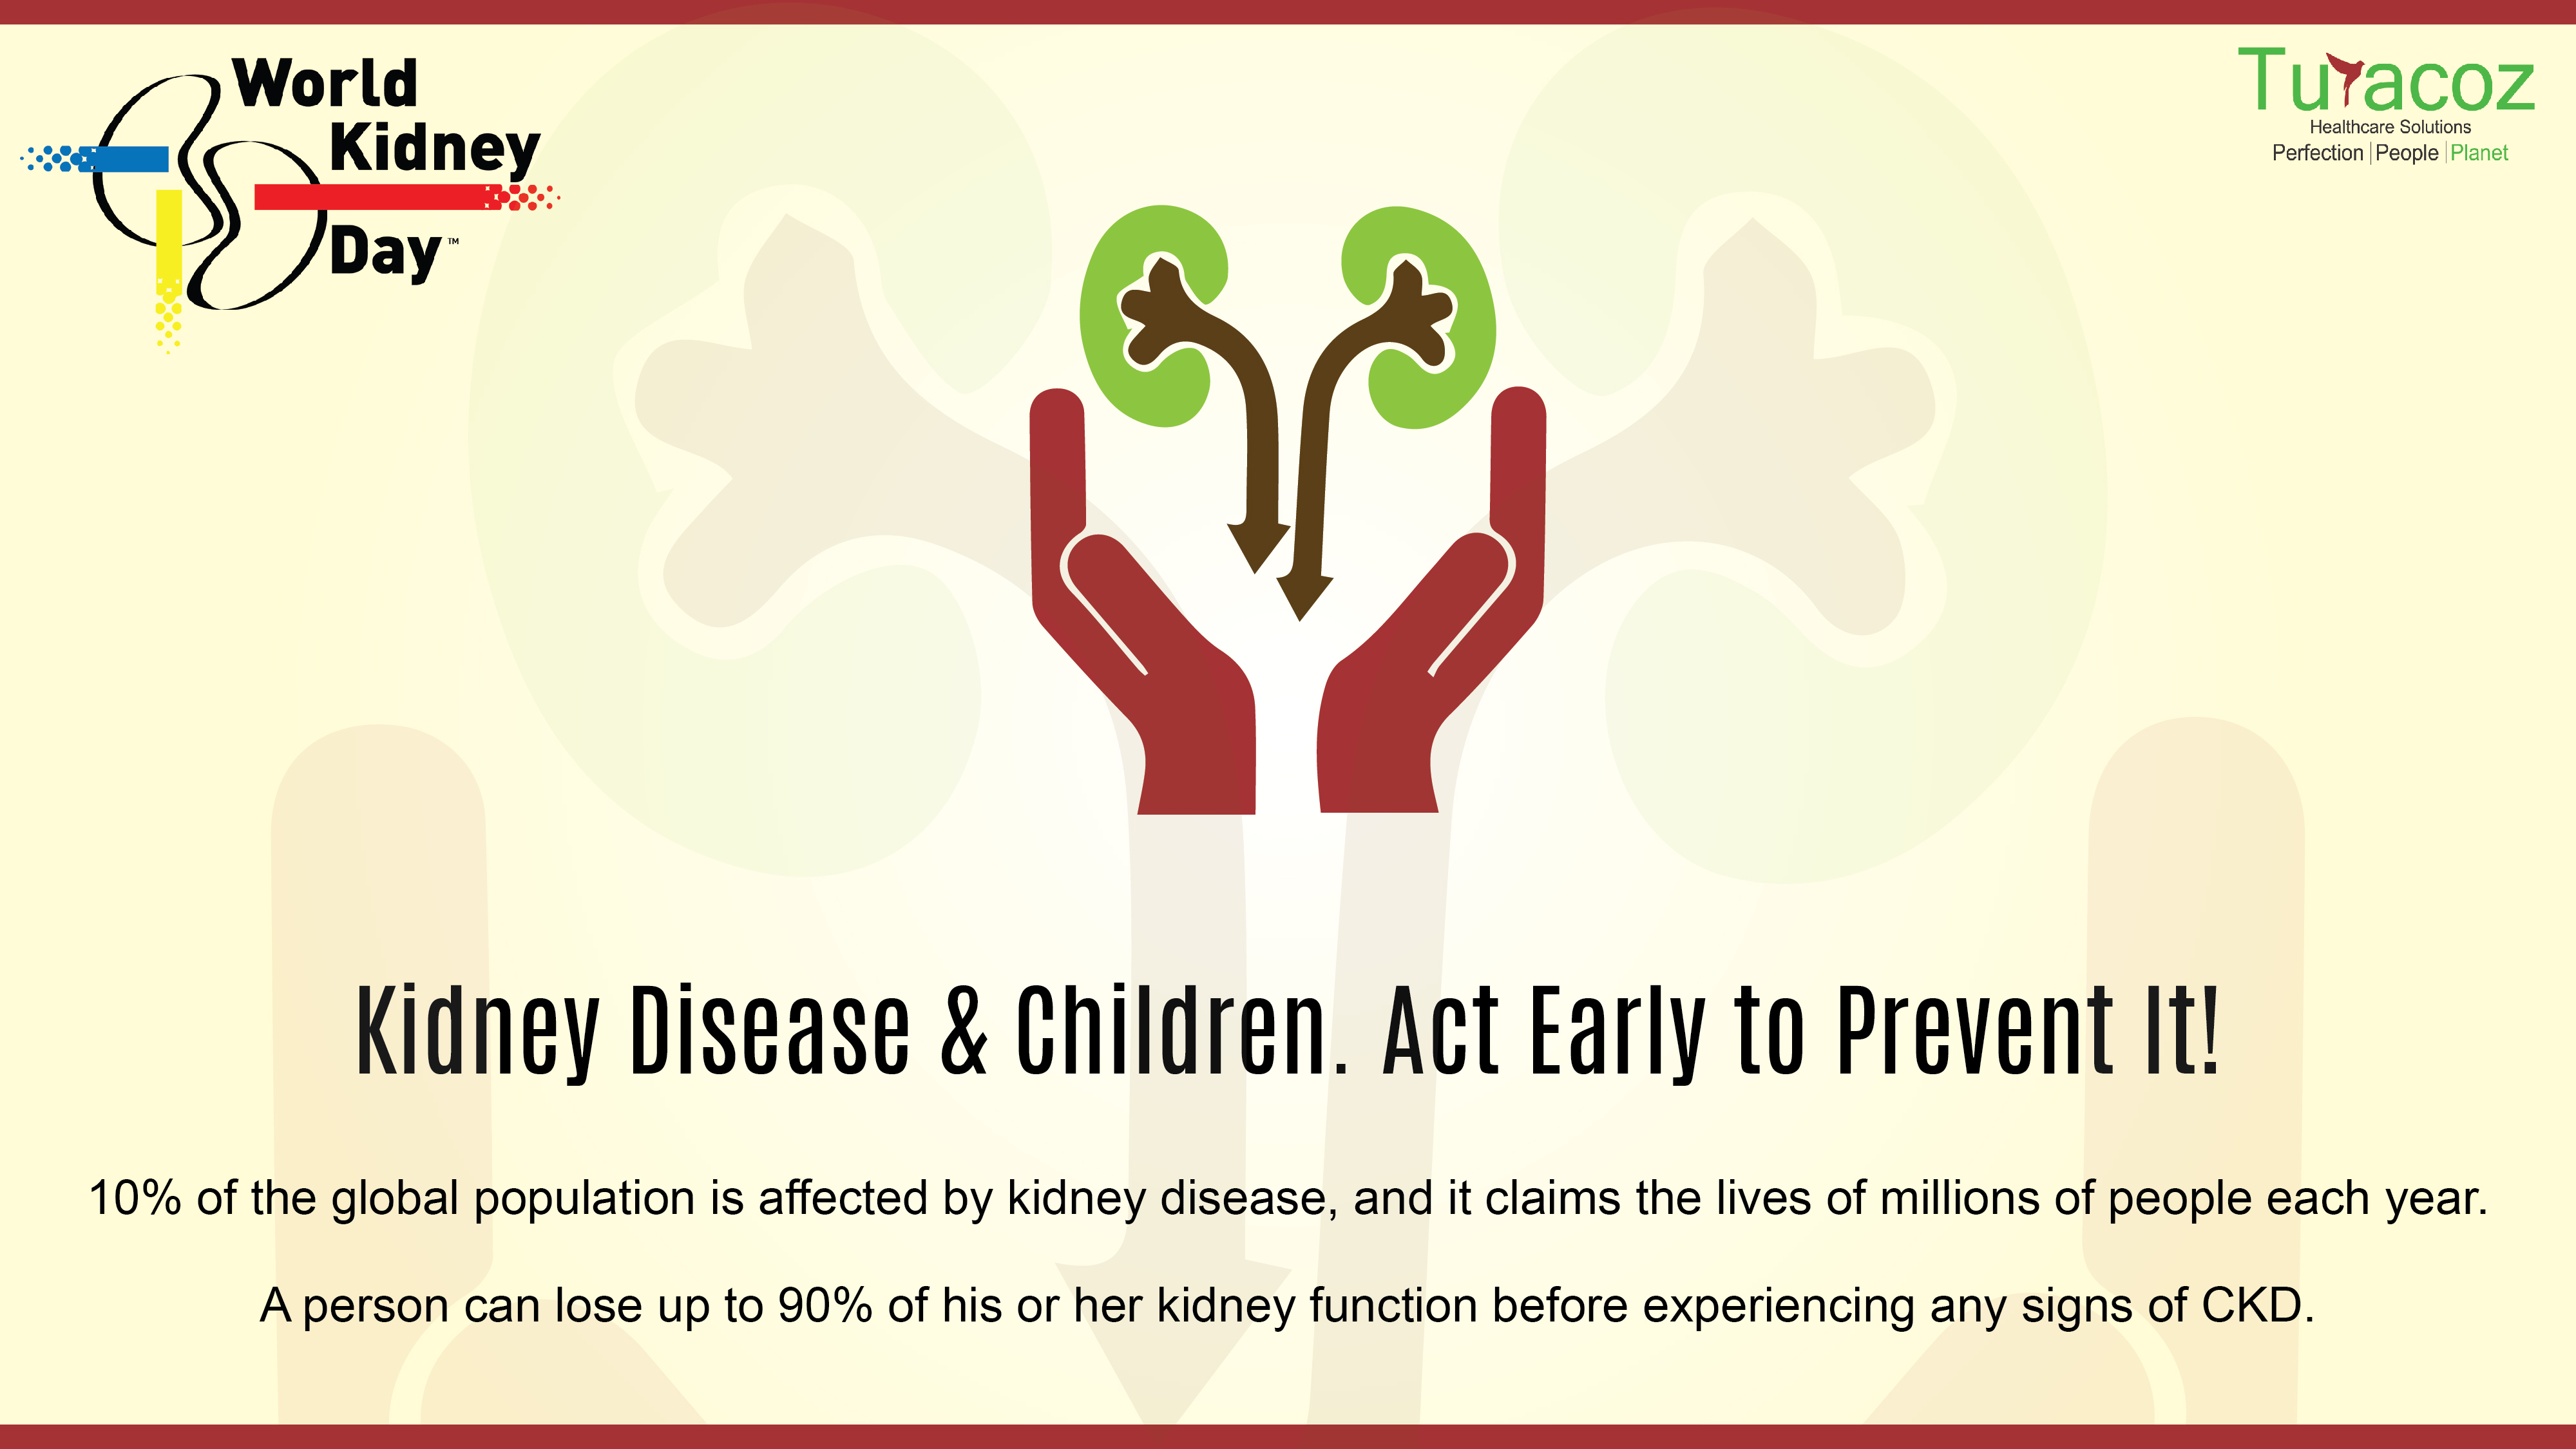 world kidney day kidney disease & children. Act early to prevent it